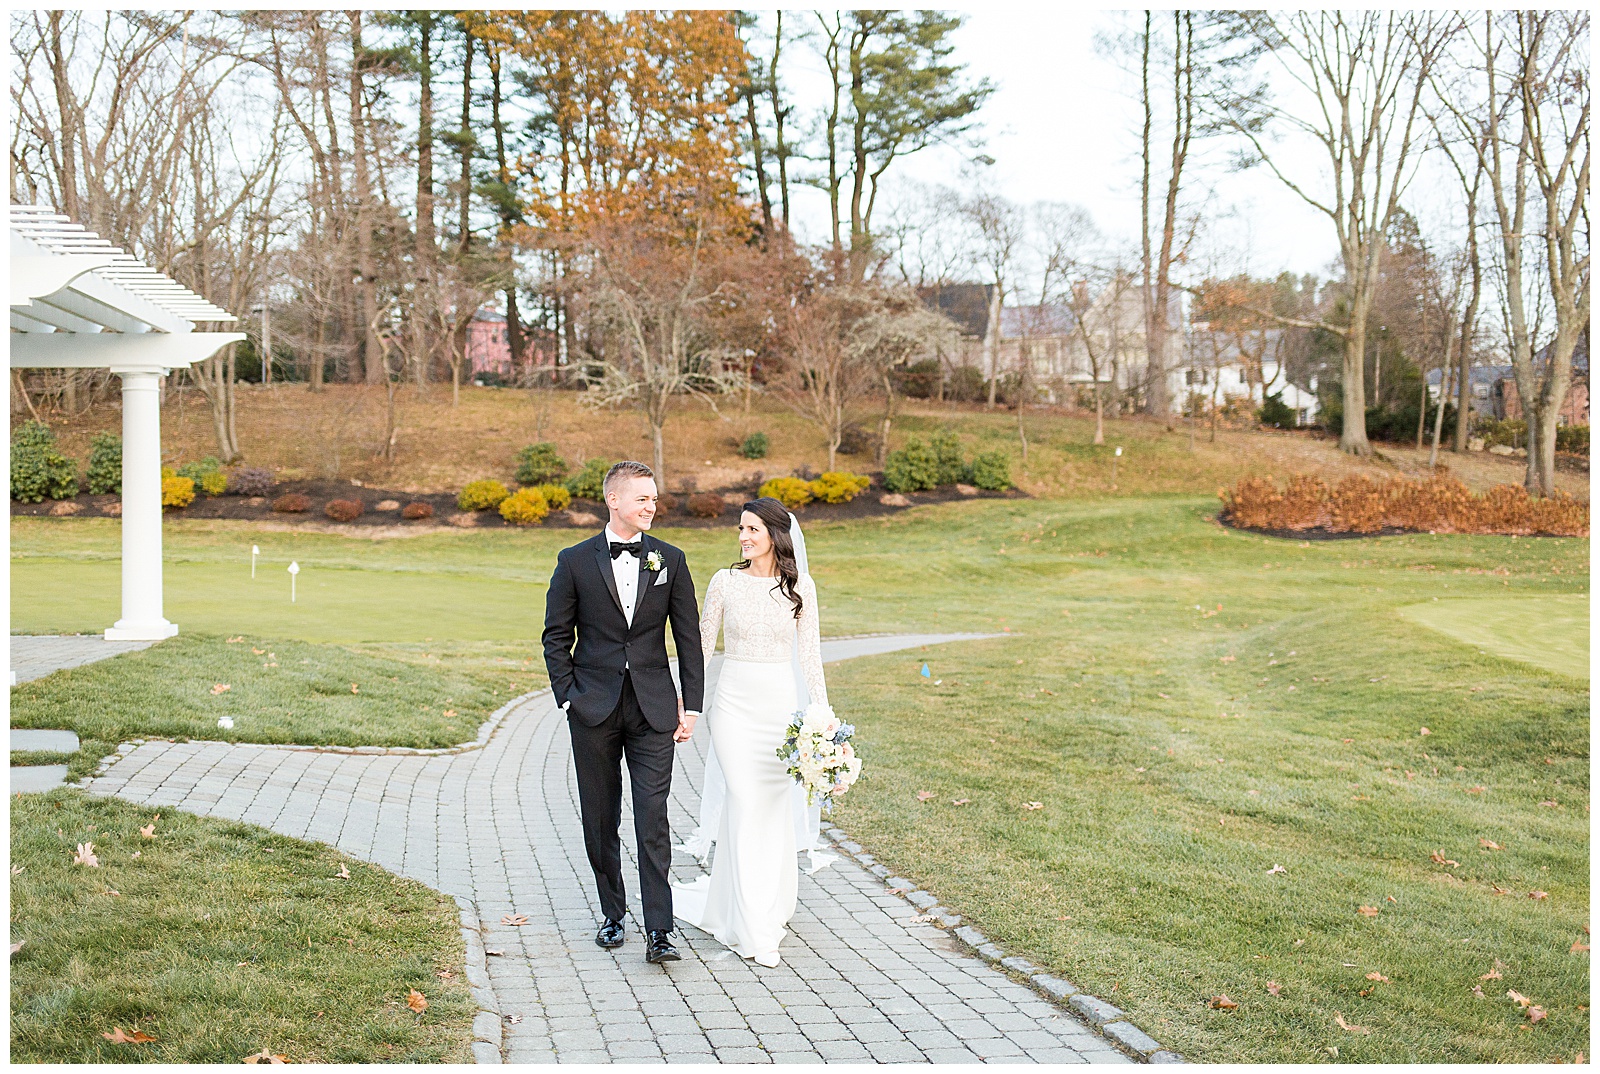 Bride and Groom walk down the path at Brae Burn Country Club